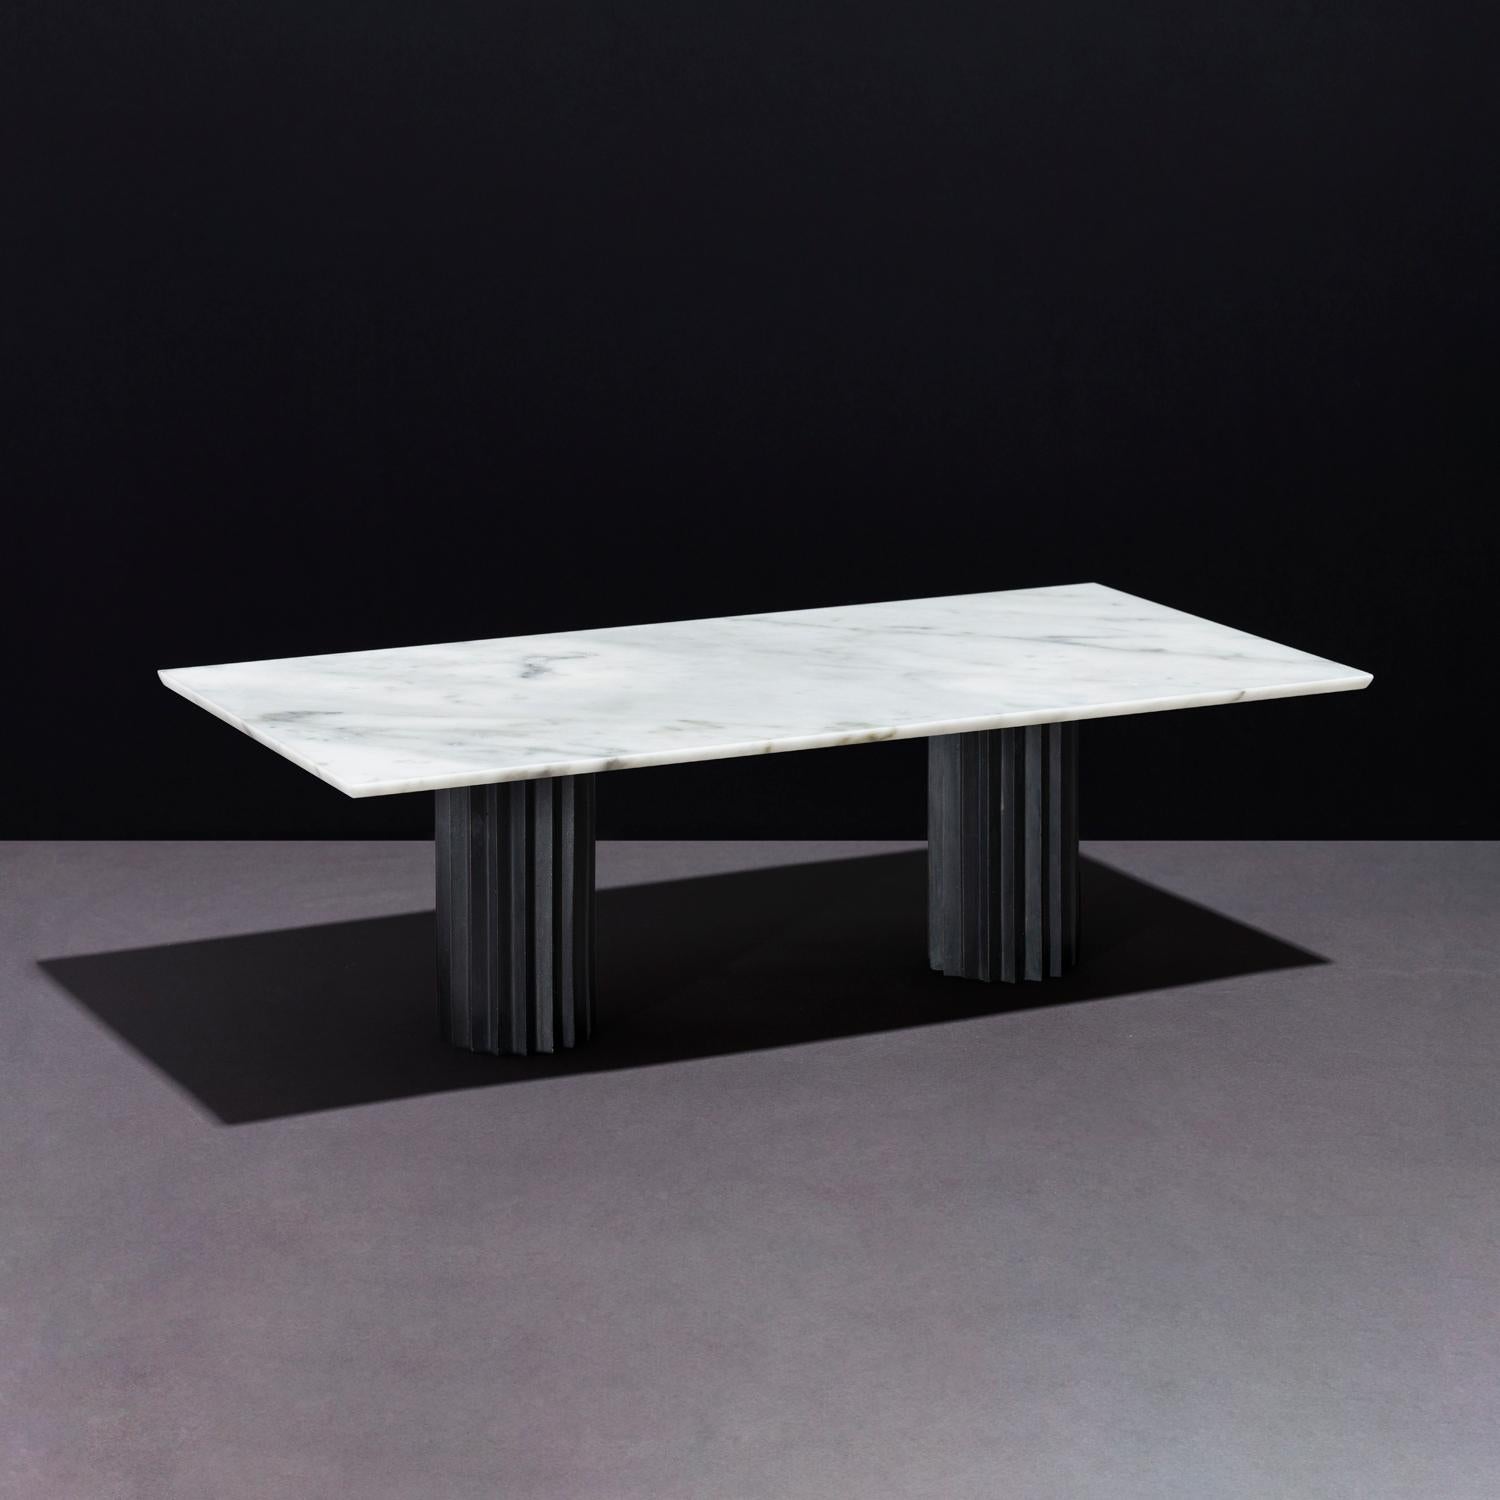 Doris White Carrara Marble Rectangular Dining Table by Fred and Juul
Dimensions: D 120 x W 240 x H 74 cm.
Materials: Black patinated bronze and white Carrara marble.

Available in round, oval and rectangular shapes. Also available in different